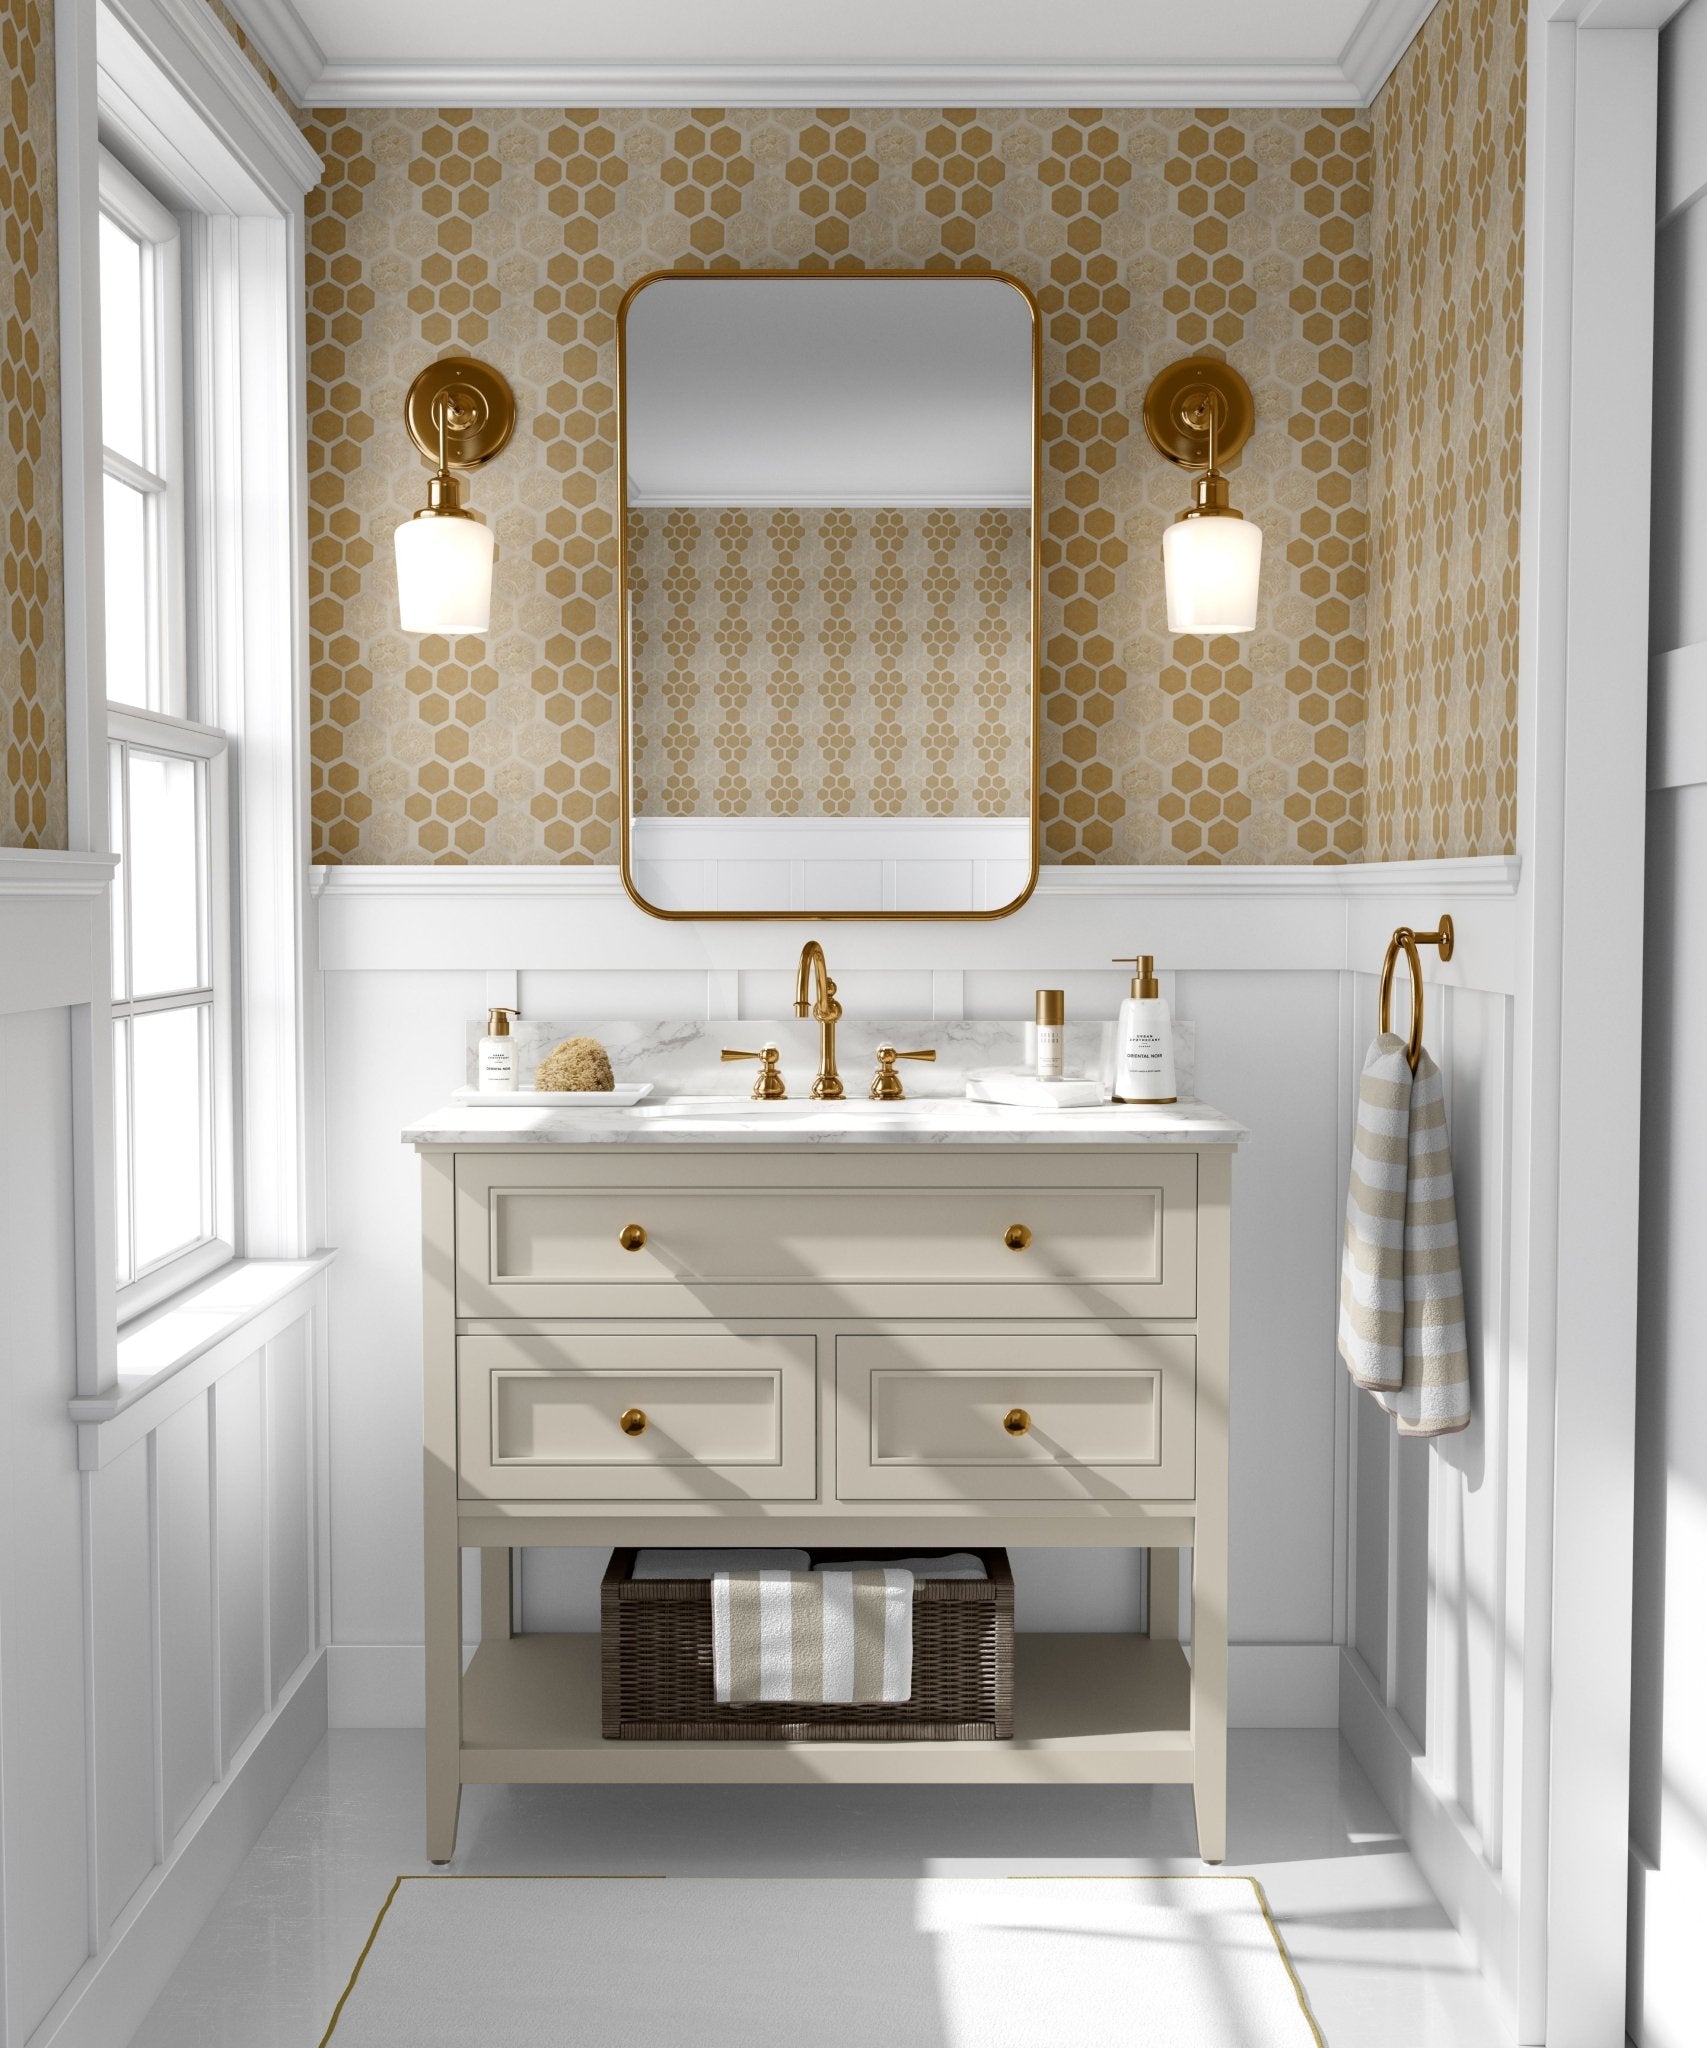 A chic bathroom interior showcases walls adorned with honeycomb flower wallpaper, featuring a pattern of gold hexagons with floral designs, complemented by a white vanity with gold fixtures, white marble countertop, and elegant gold-accented wall sconces